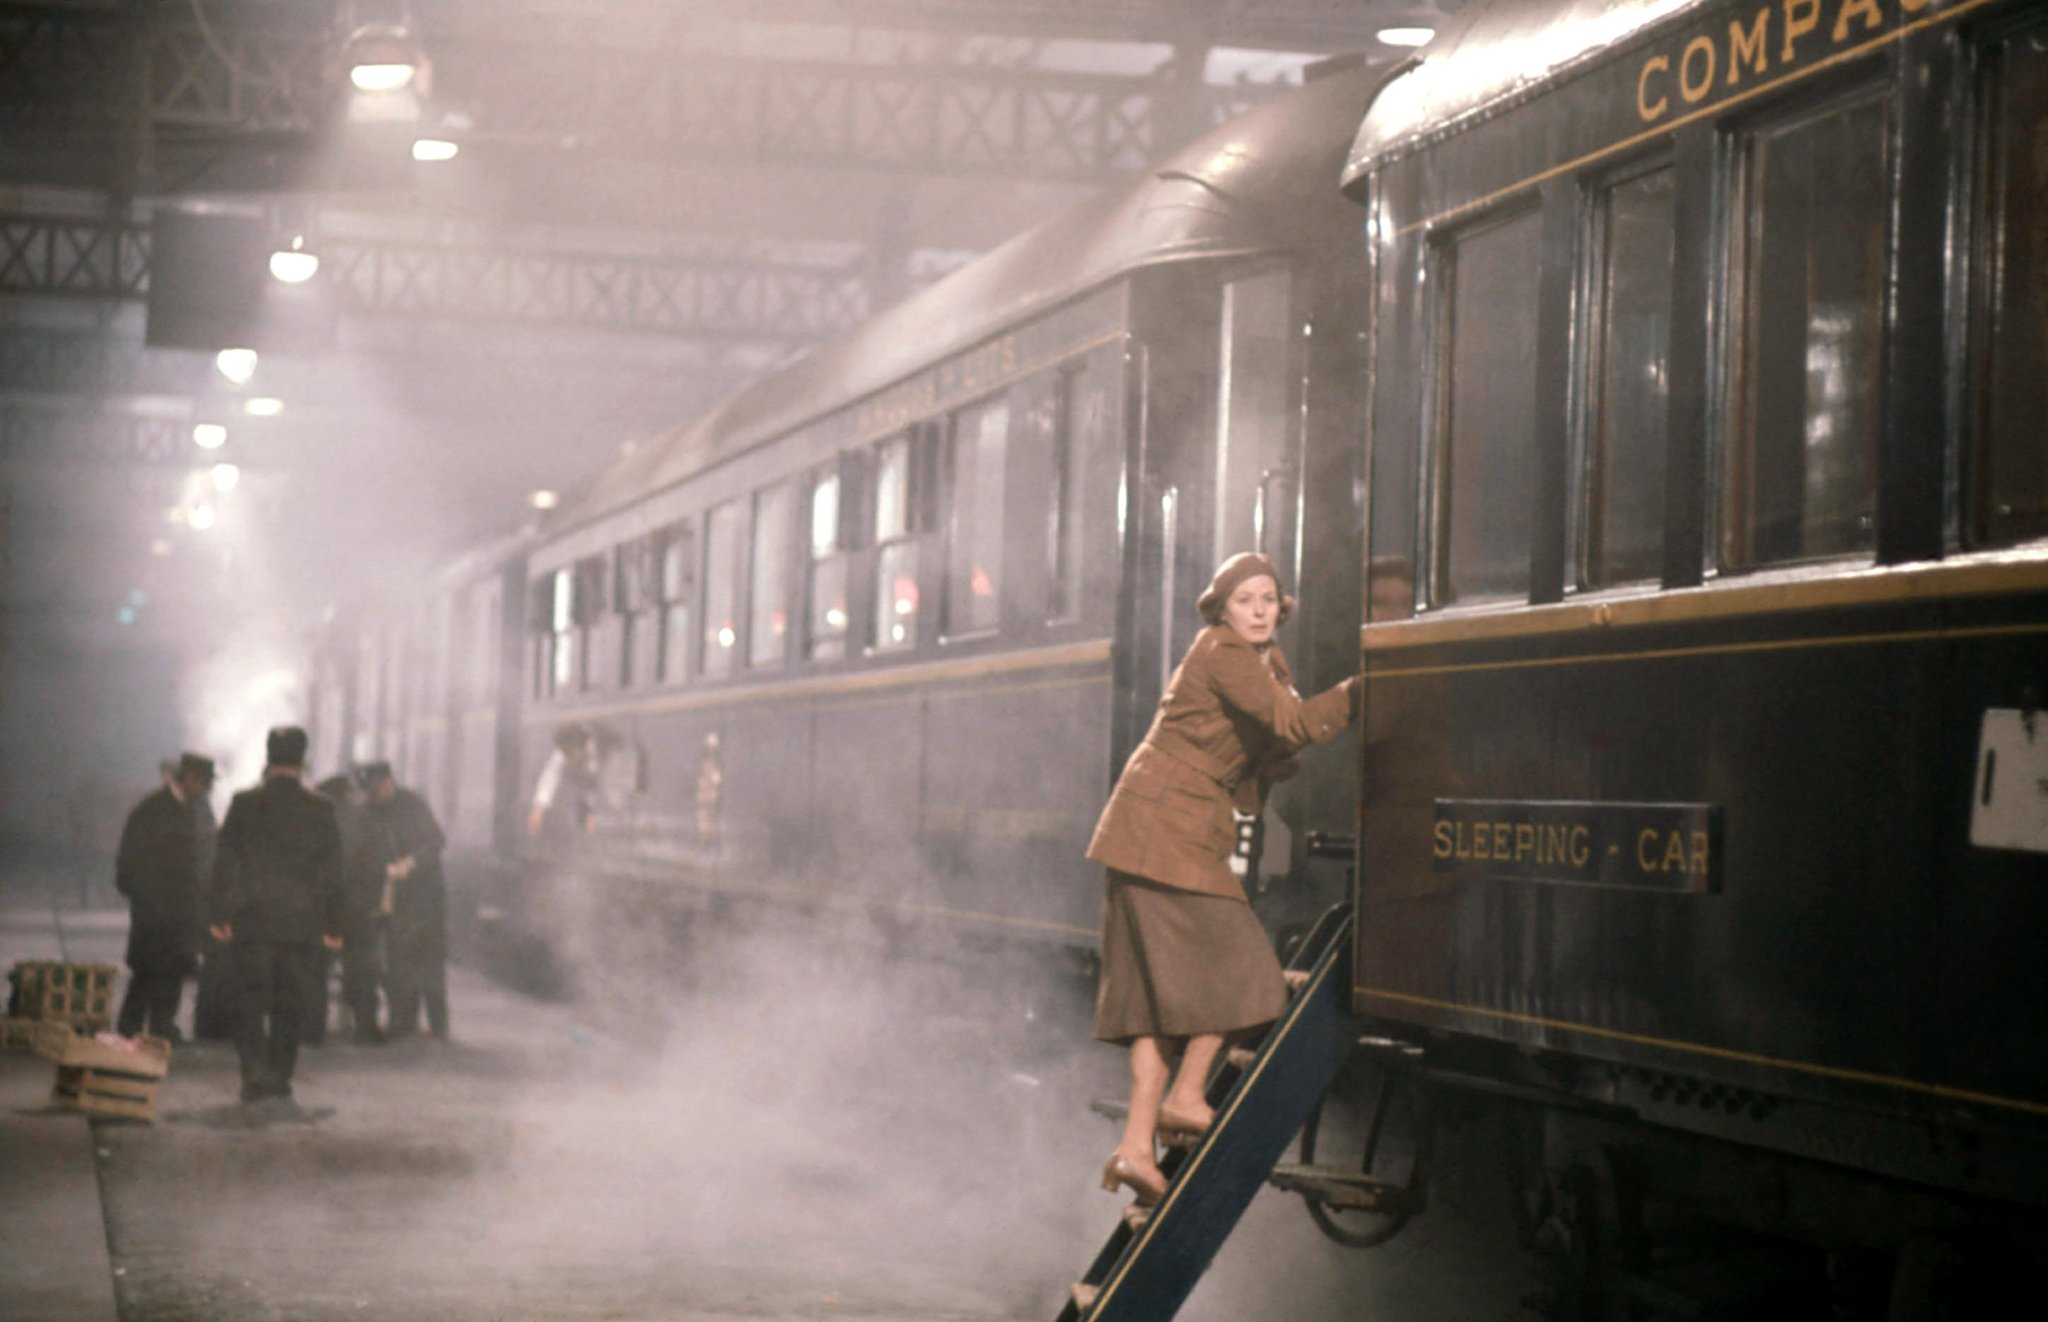 Ahead of the Film, Here’s How the Murder on the Orient Express Book Ends